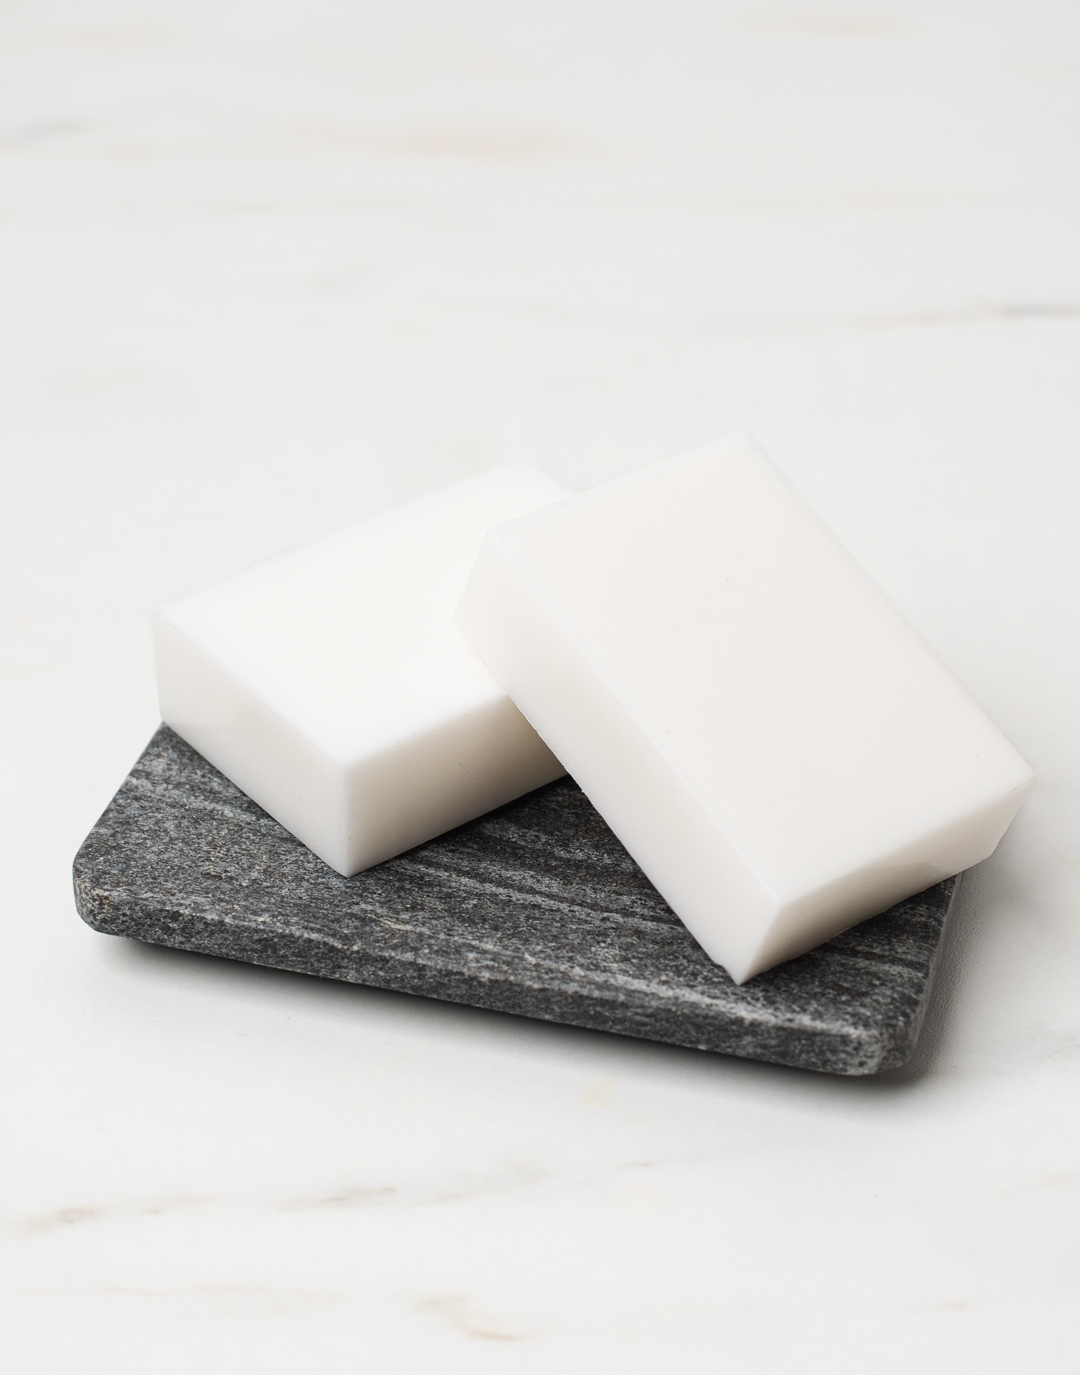 Two white rectangular bars of soap are laid on a tabletop to cure.